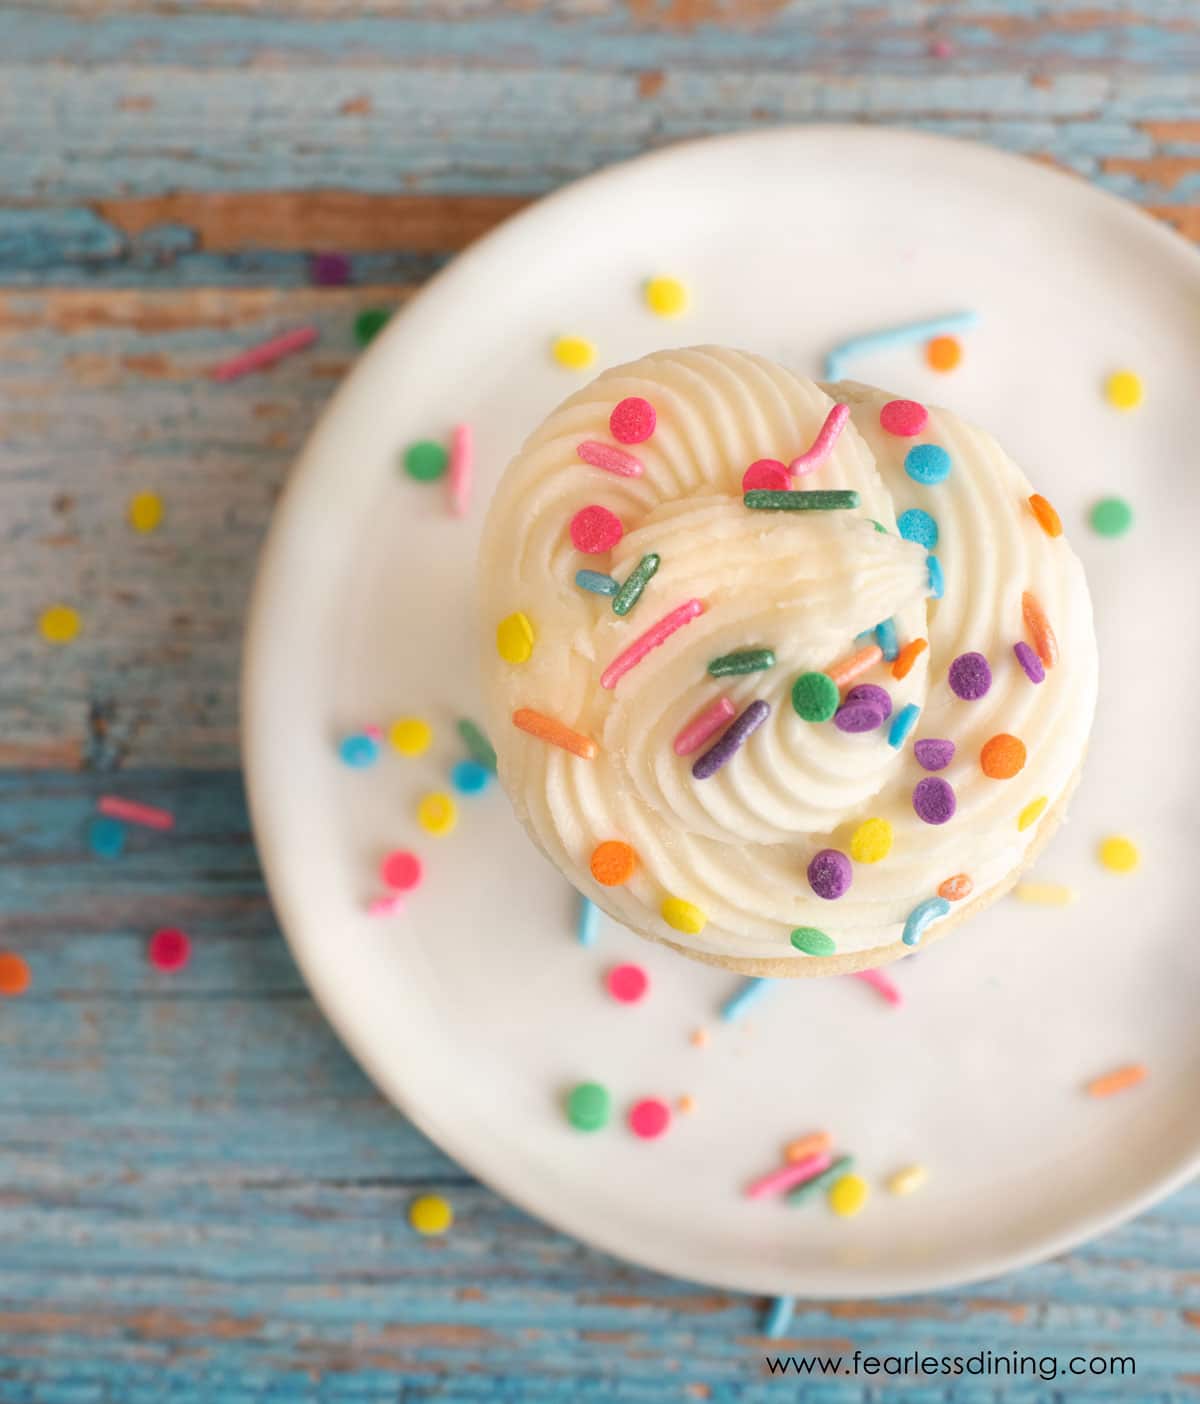 The top view of a cone cake decorated with vanilla frosting and rainbow sprinkles.